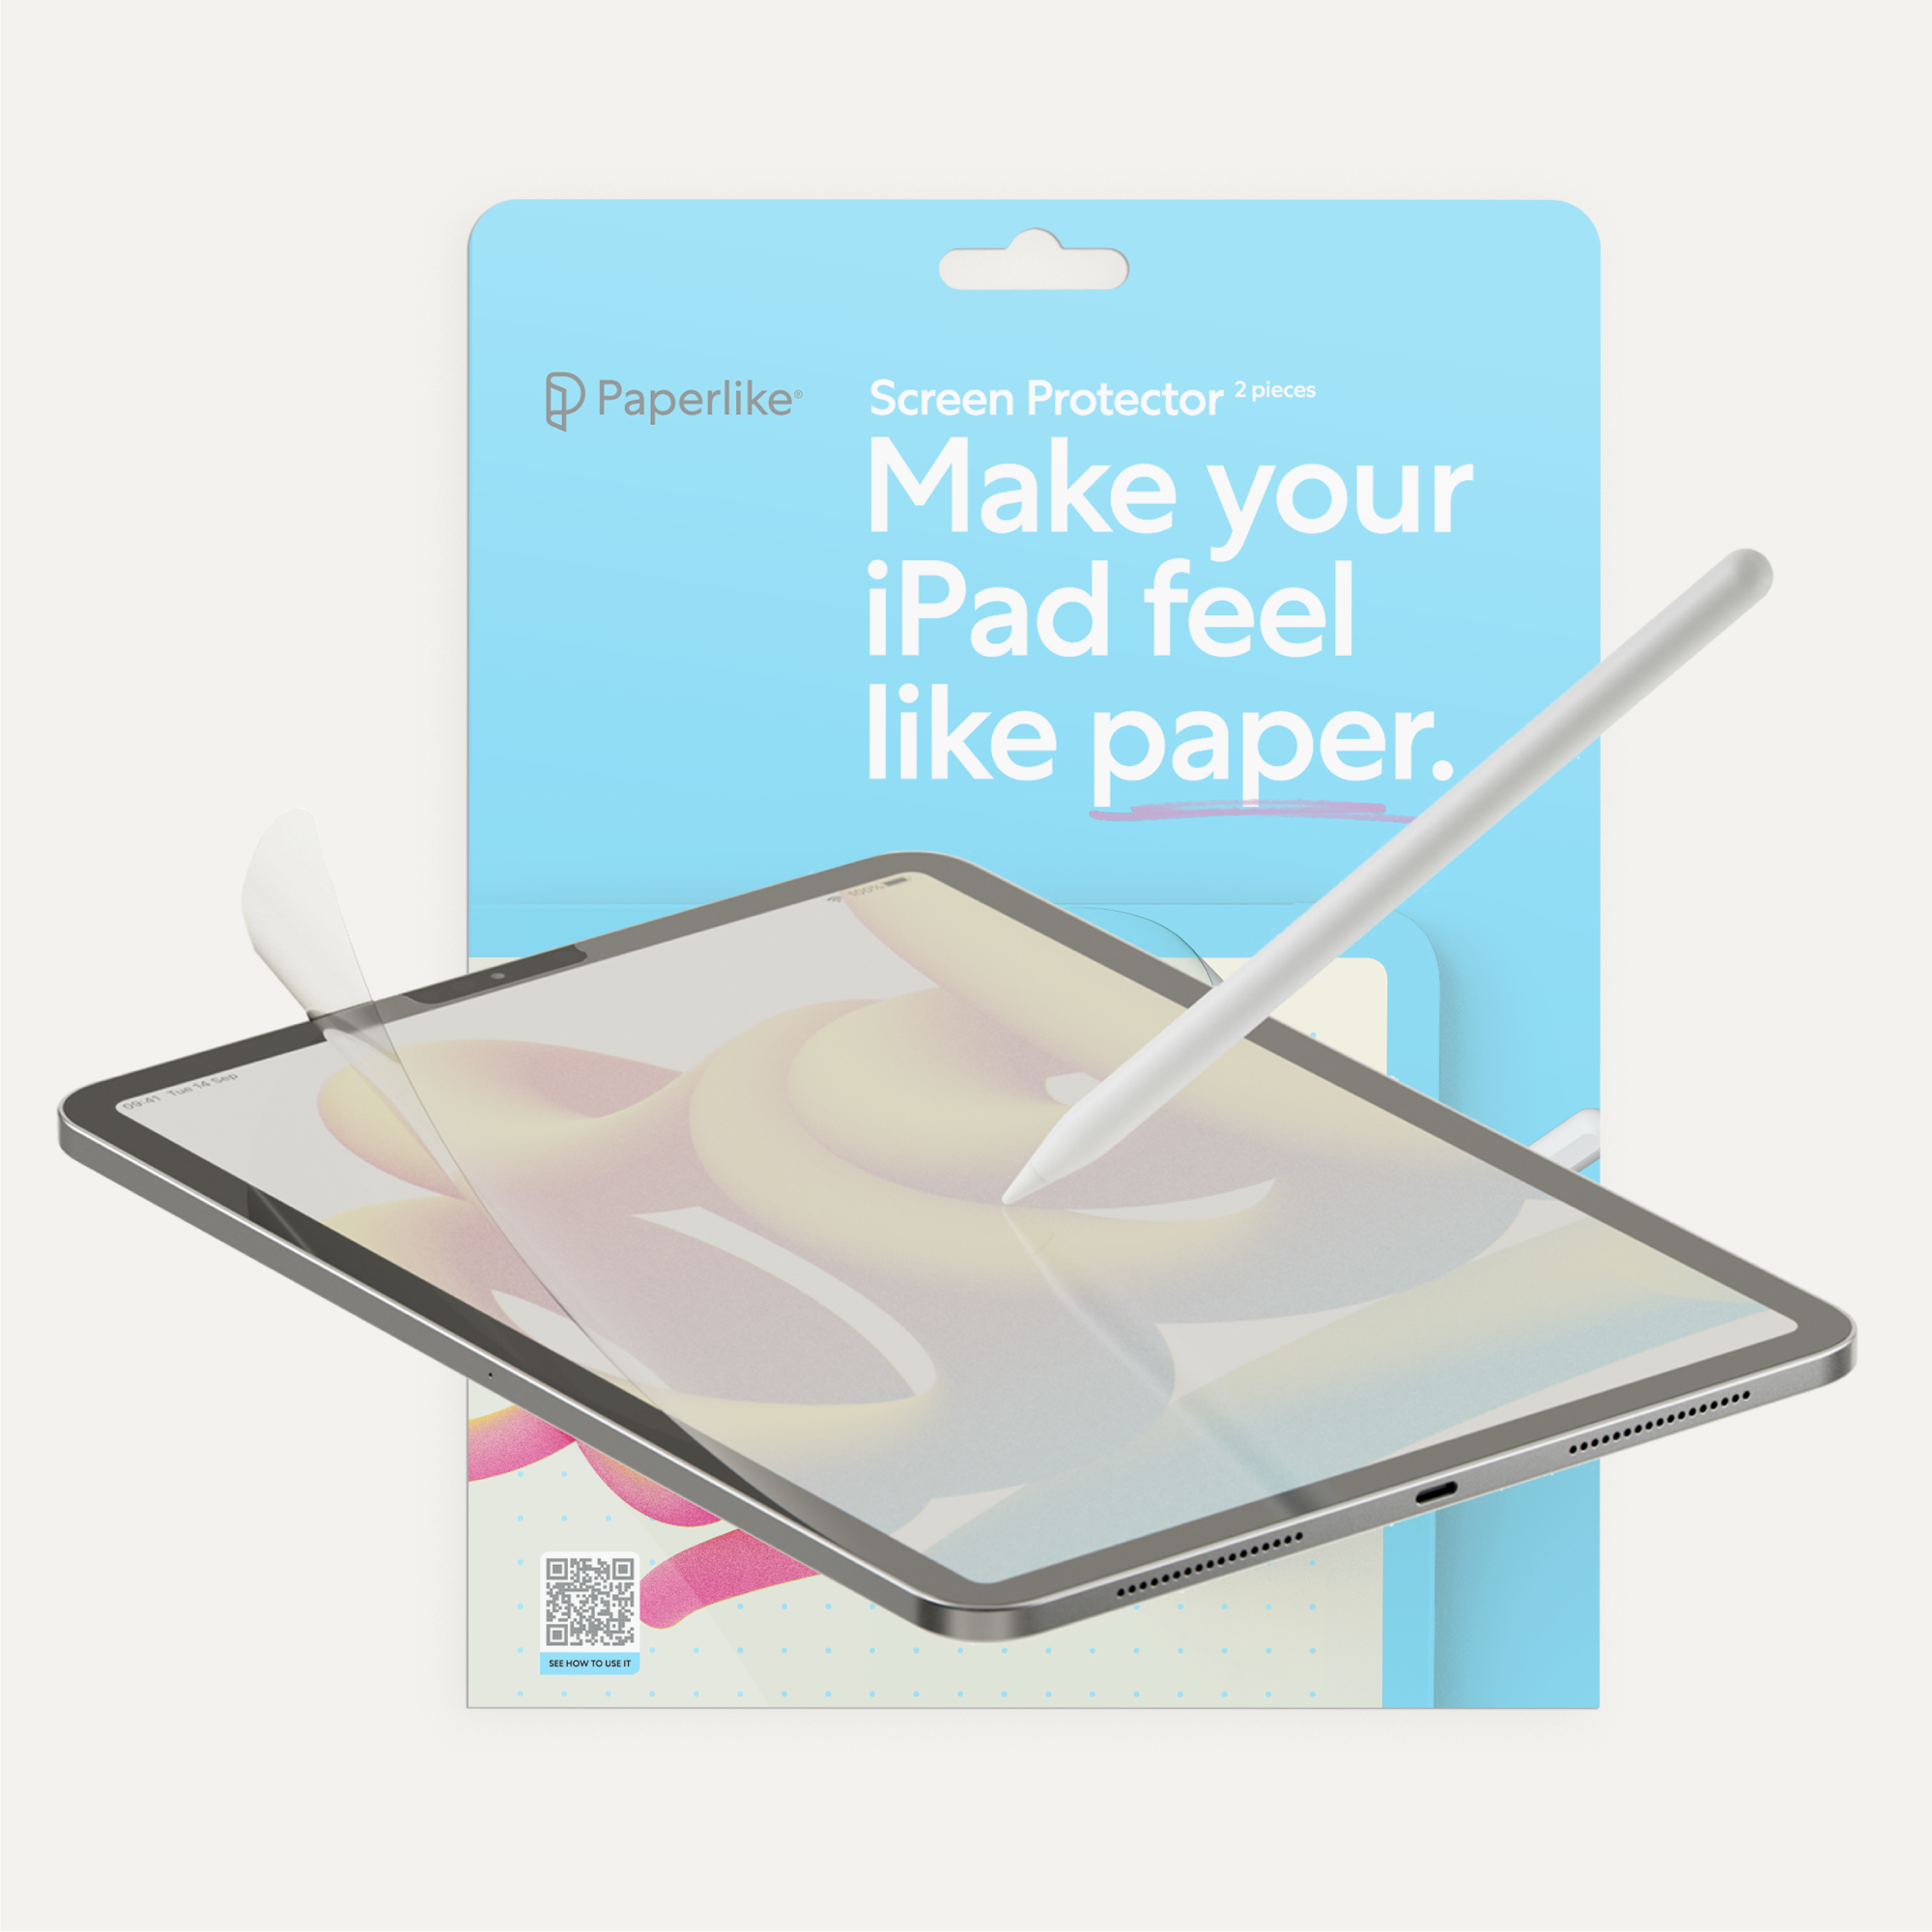 Paperlike Screen Protector for writing and drawing on Apple iPad. Made for Apple Pencil.